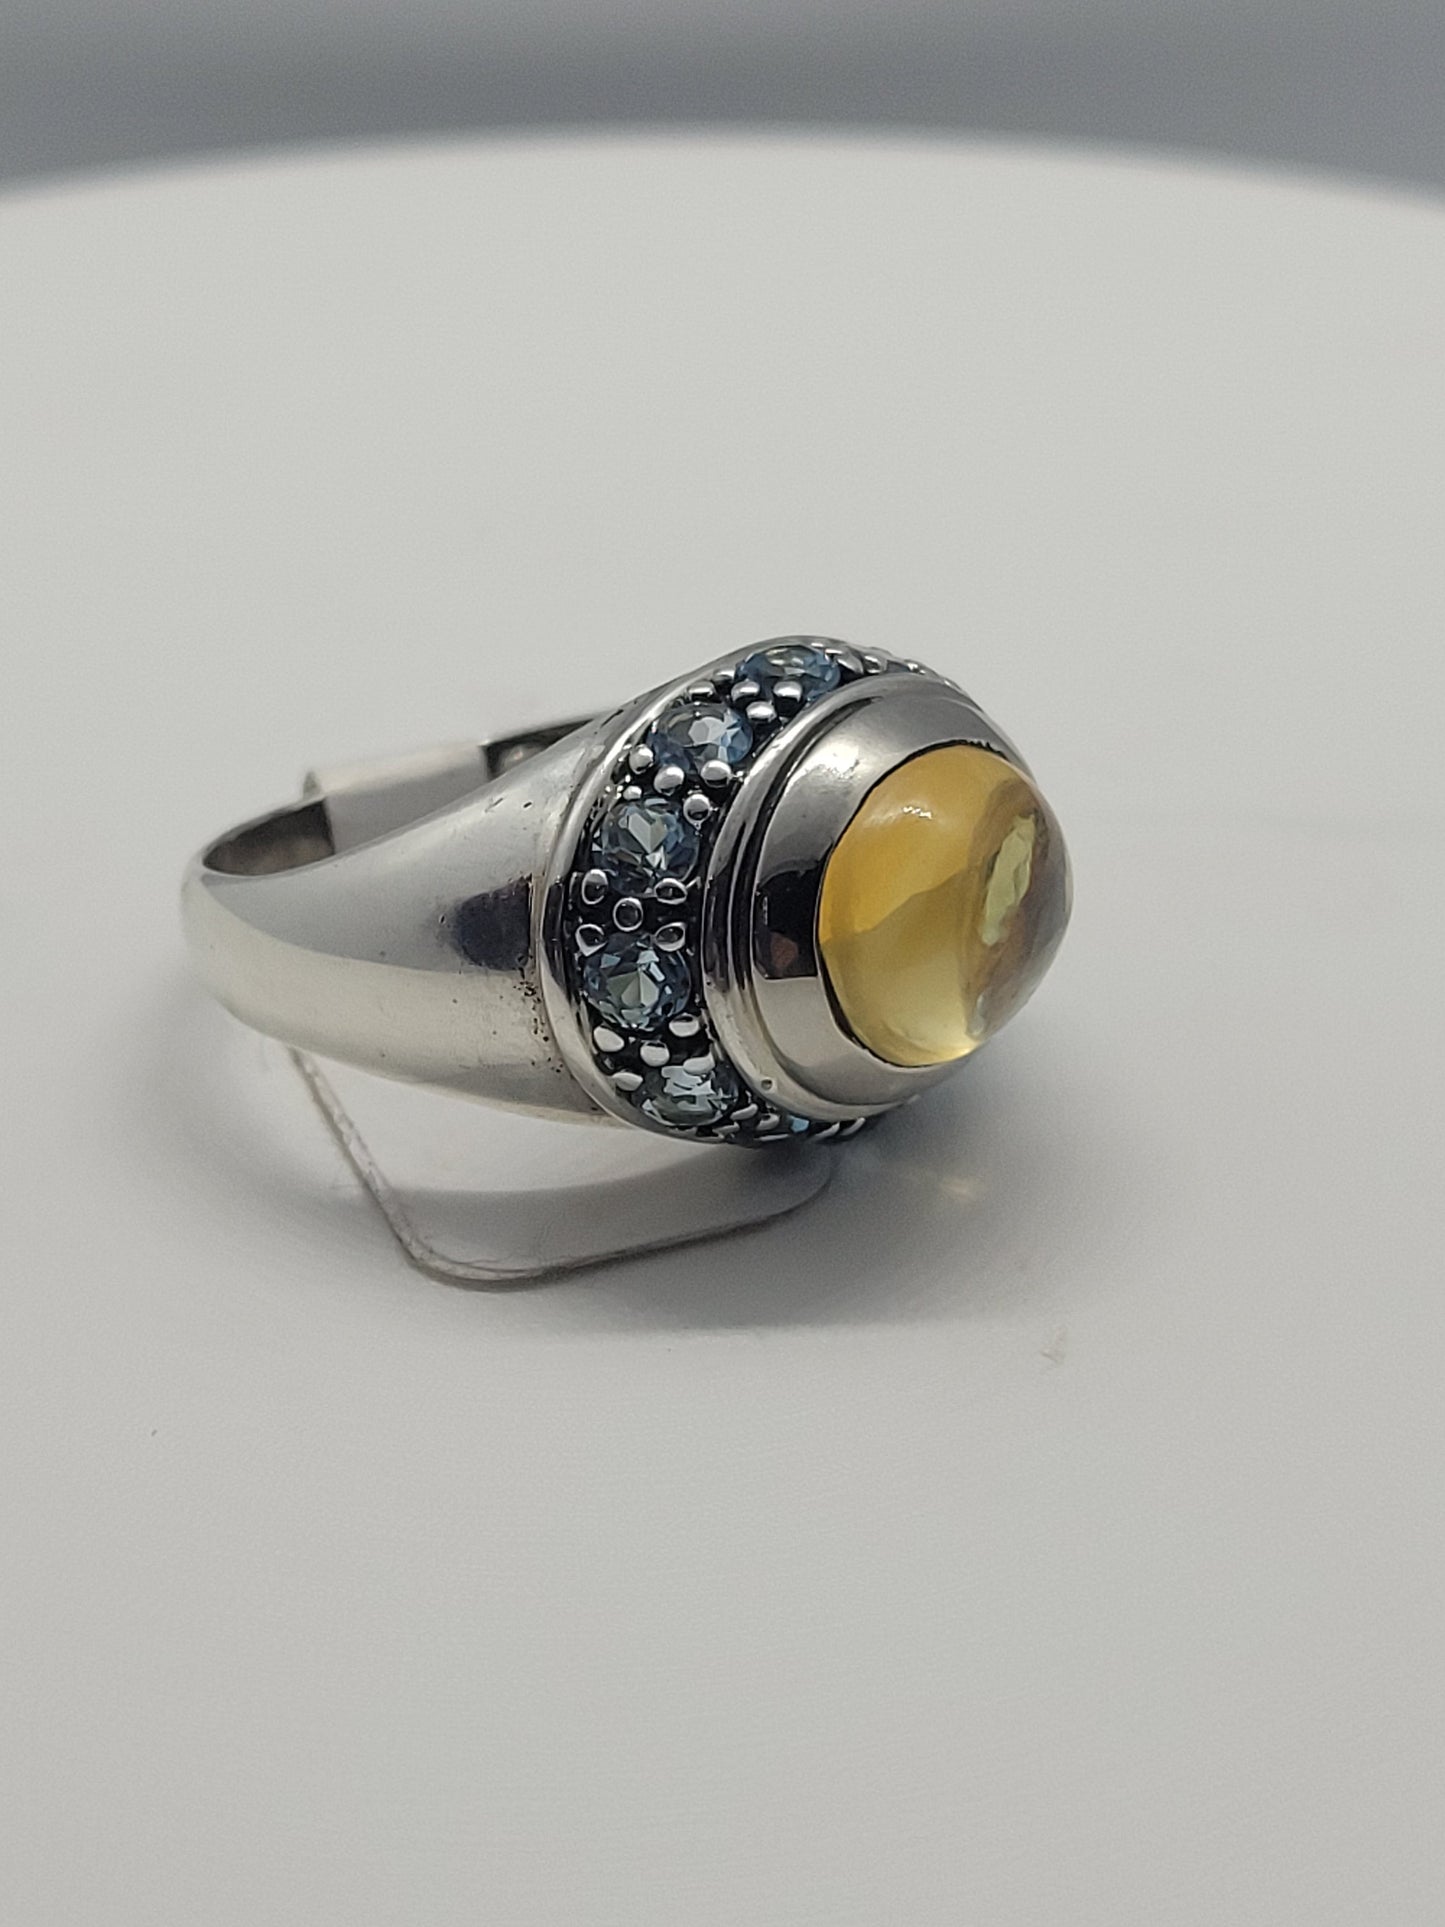 Vintage Yellow Citrine Ring with Blue Topaz set in 925 Sterling Silver